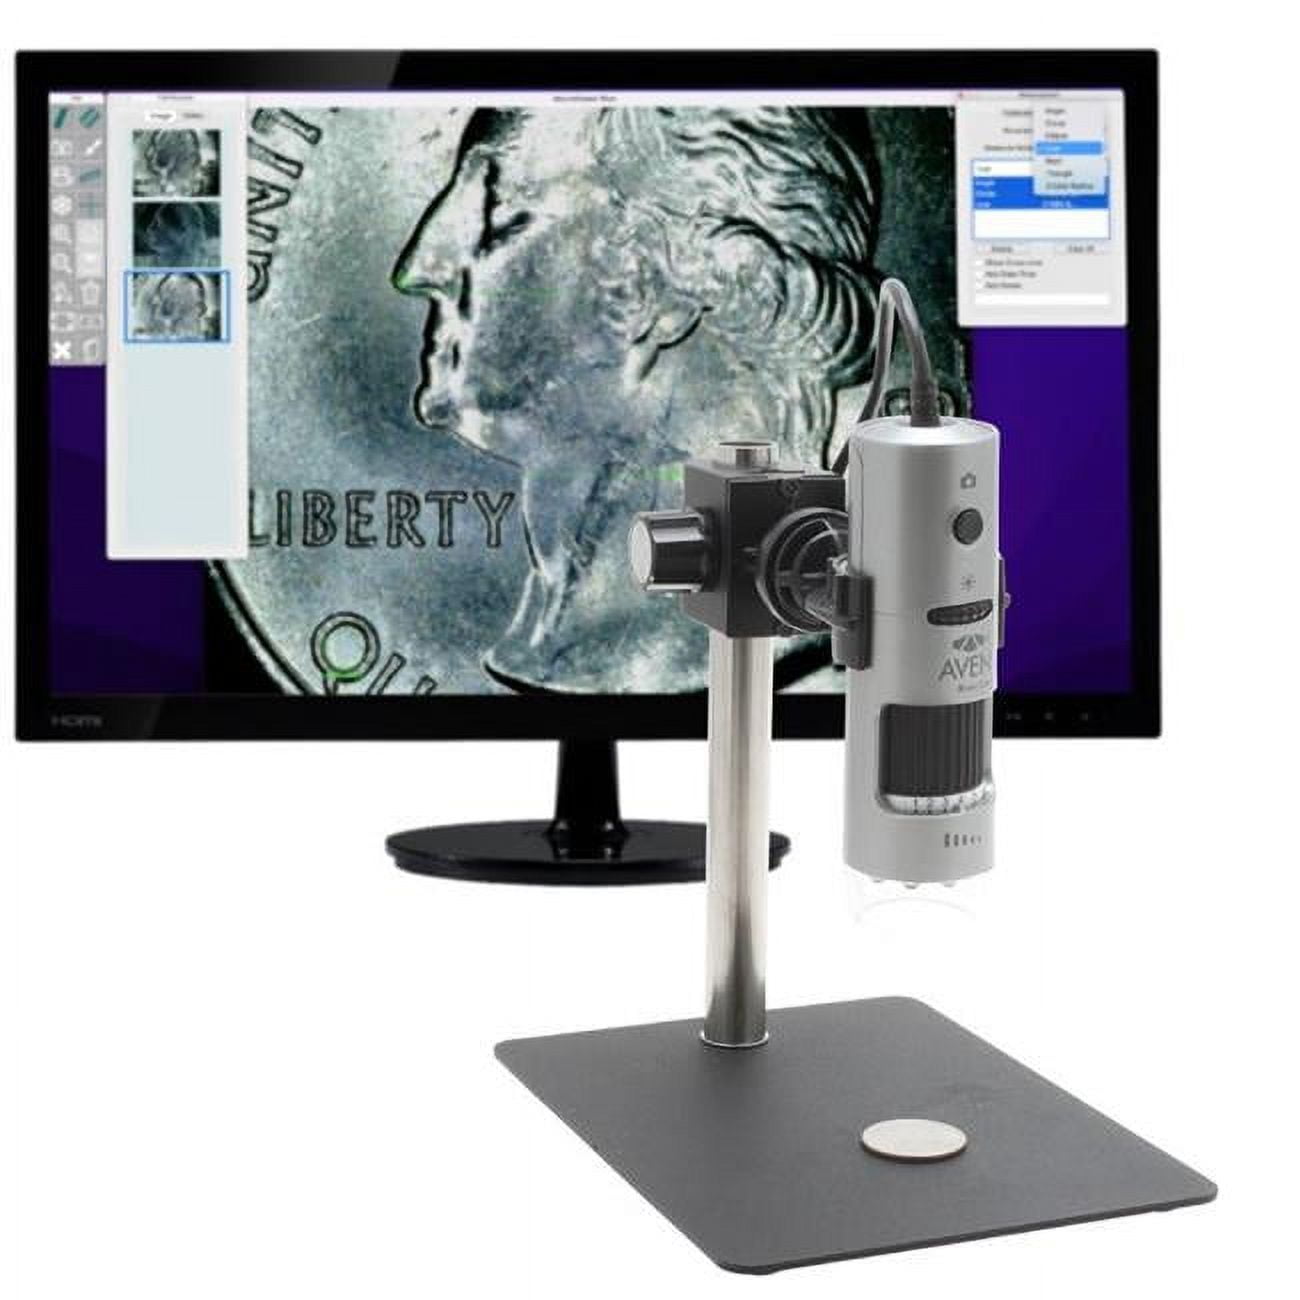 Picture of Aven 26700-218 Mighty Scope v2 USB Digital Microscope